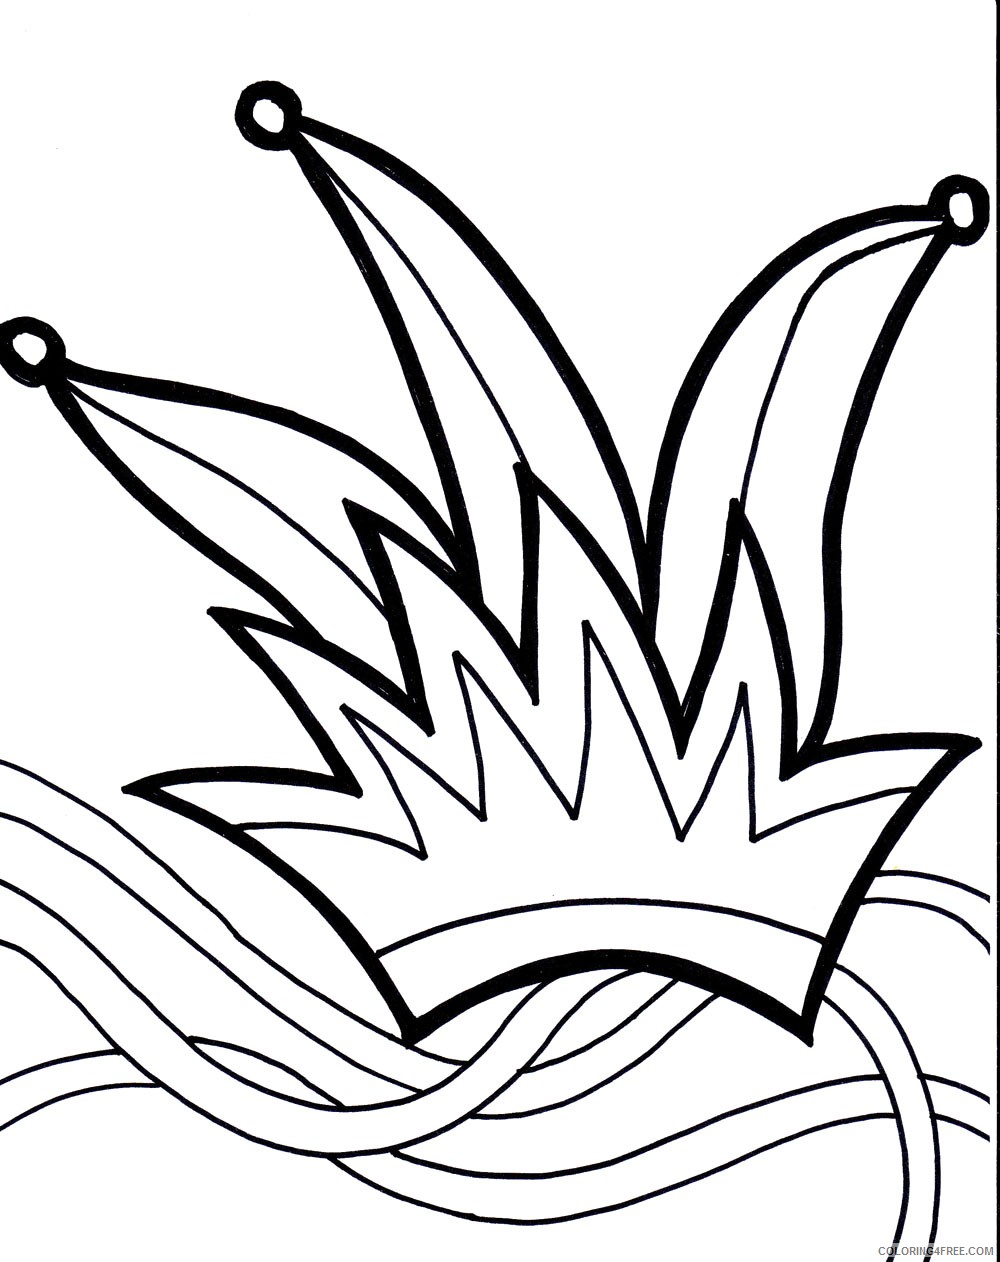 mardi gras hat coloring pages Coloring4free